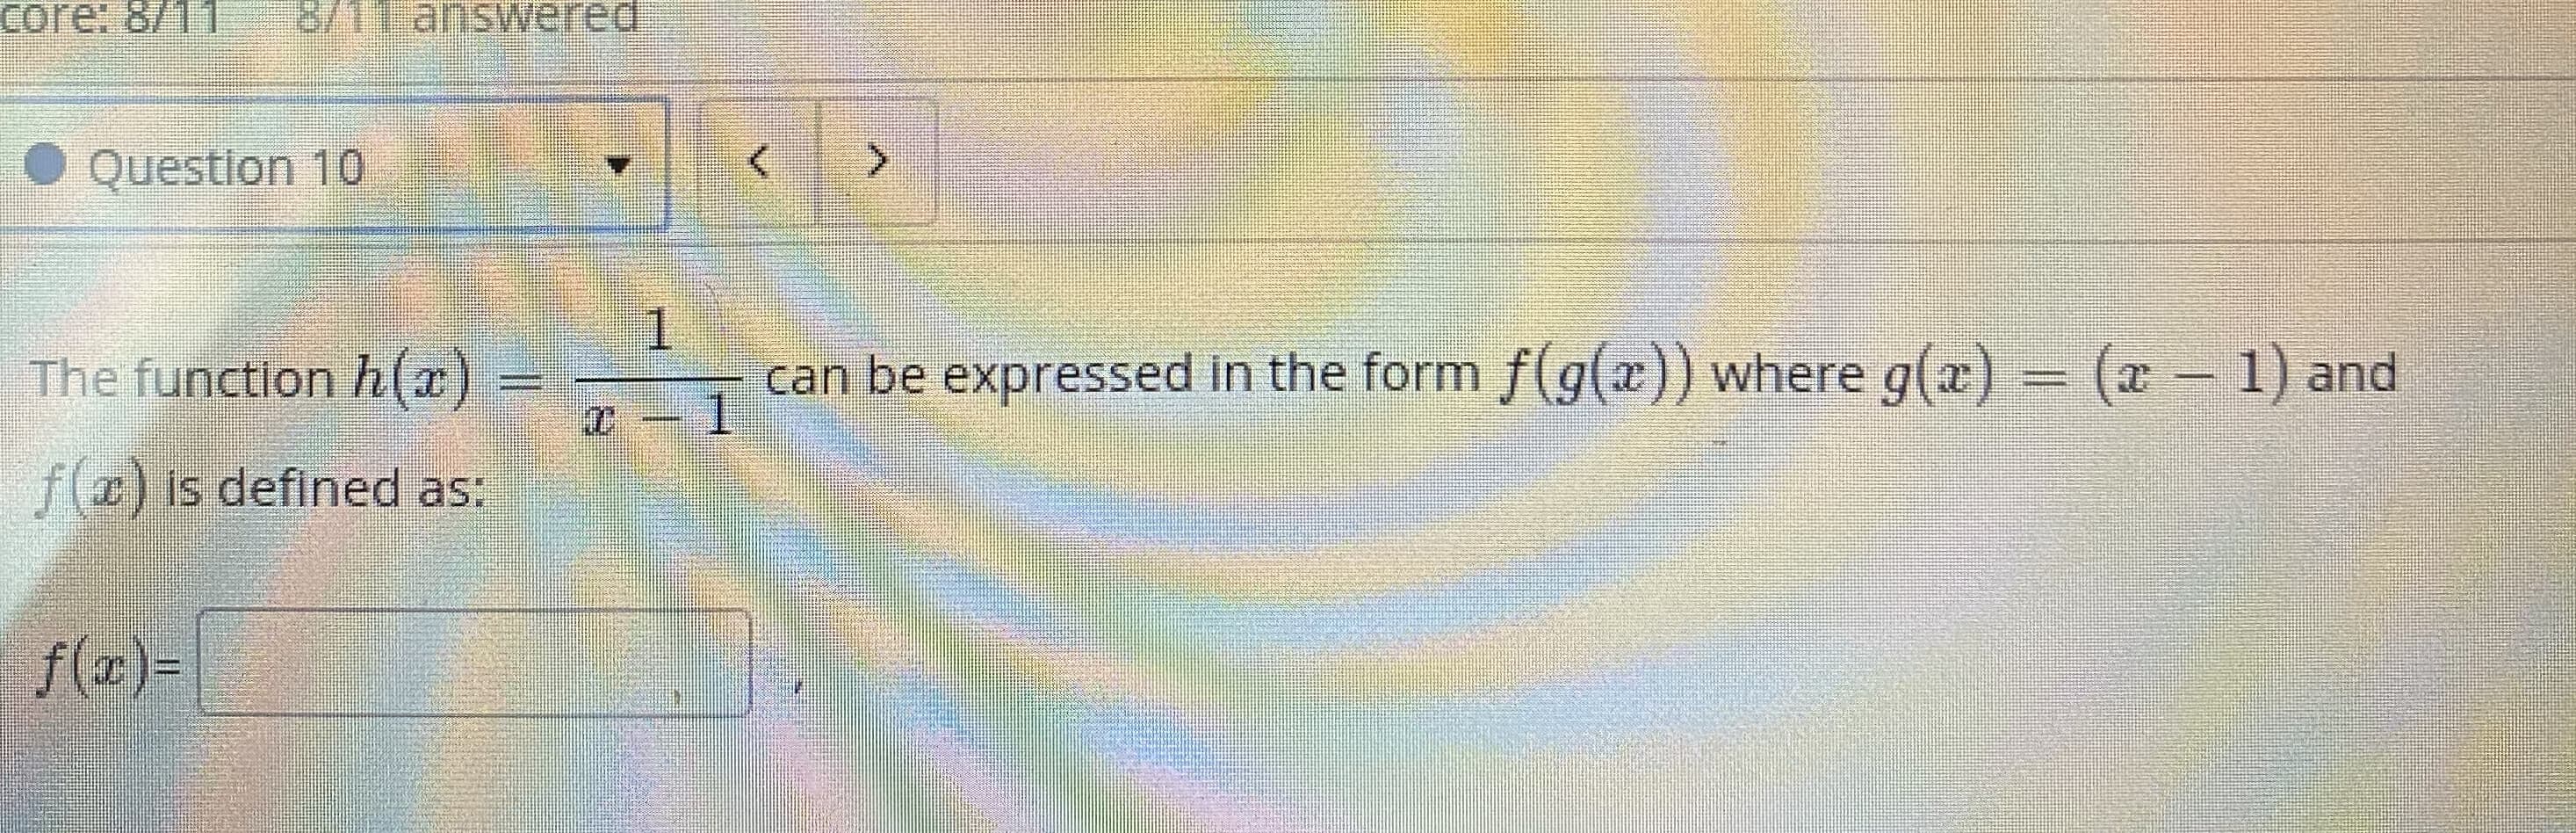 1.
The function h(x)
can be expressed in the form f(g(x)) where g(x) = (x - 1) and
-1
f(r) is defined as:
f(a)=
